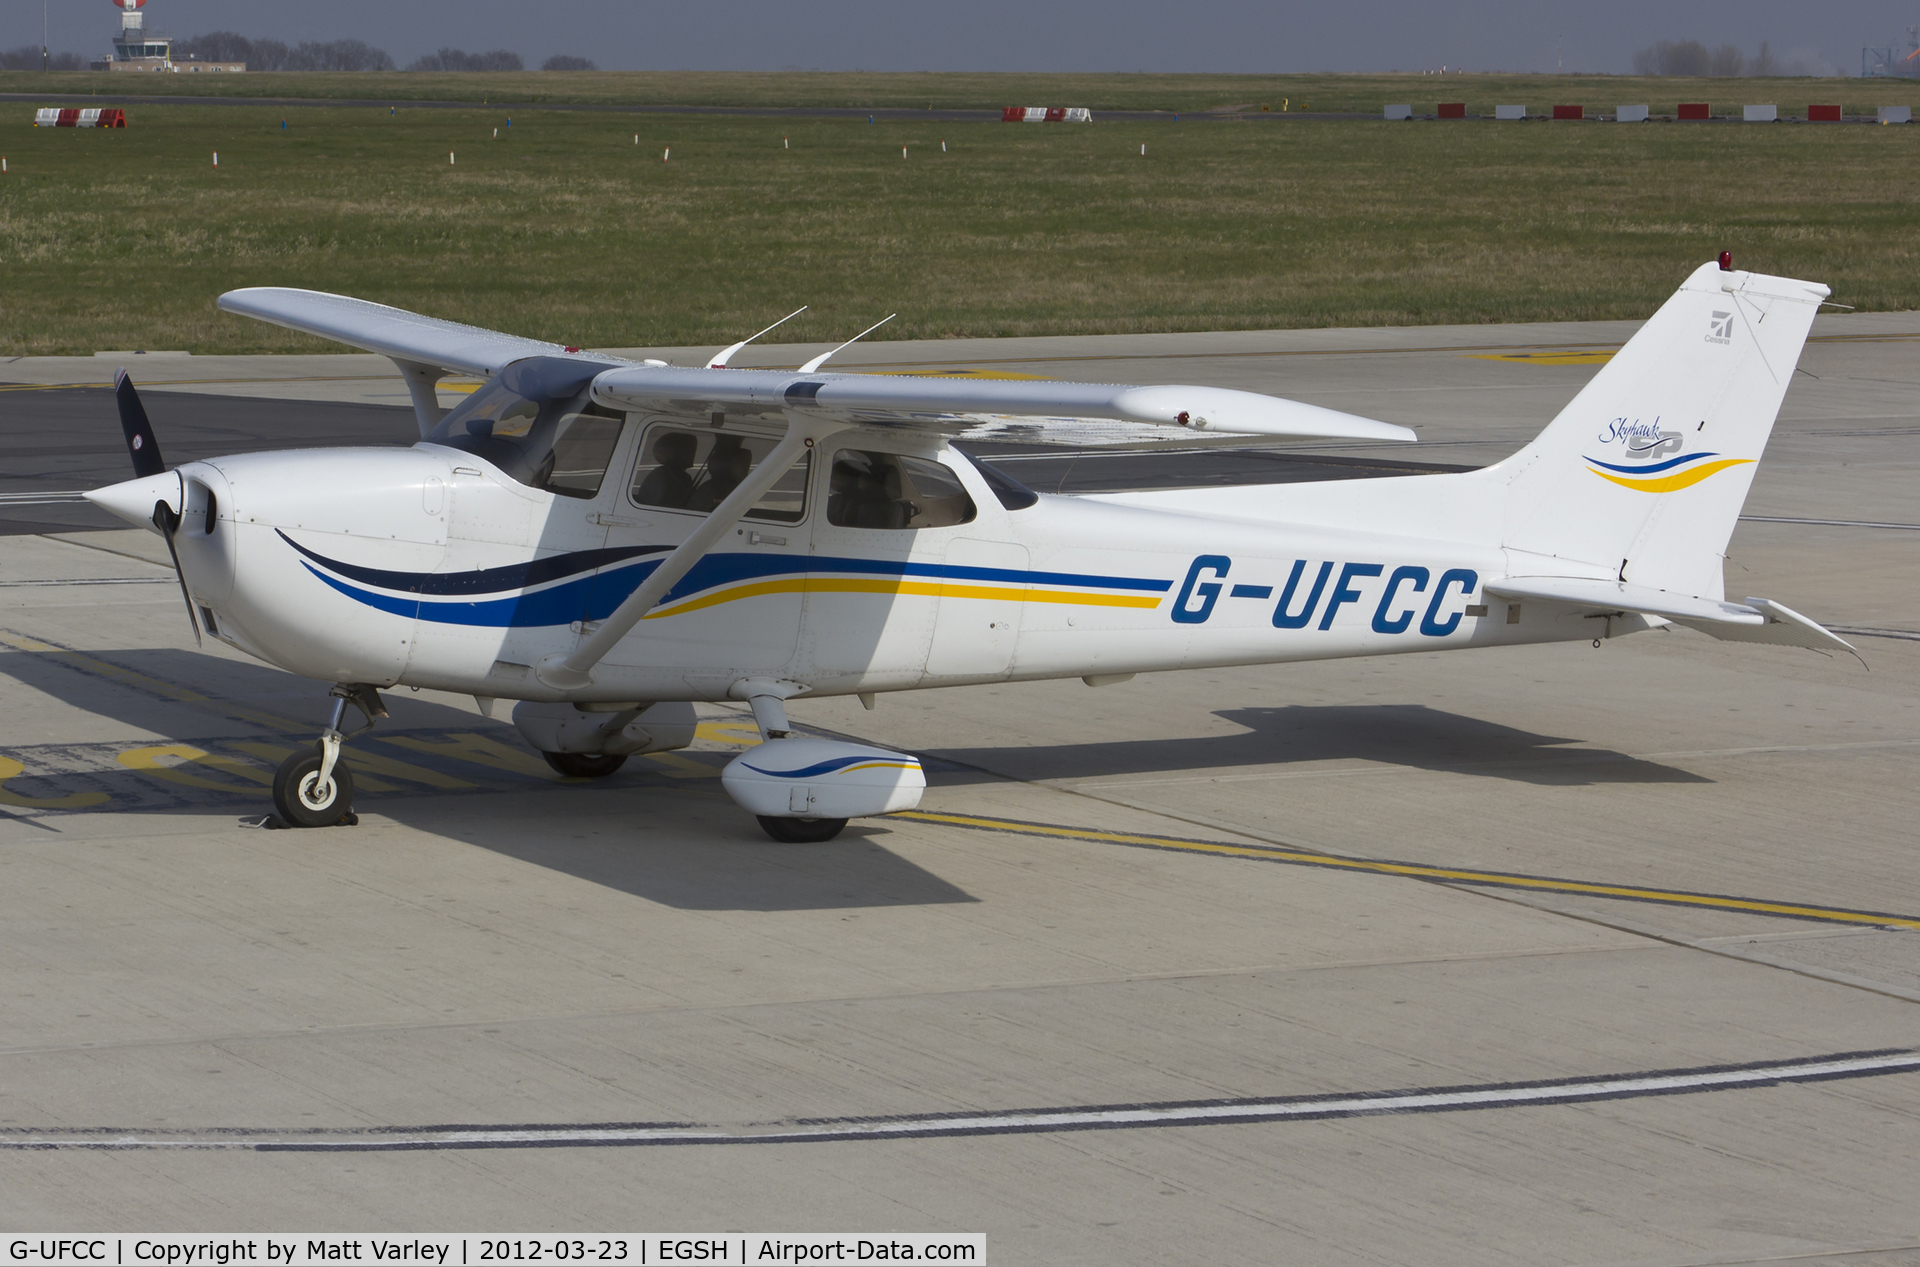 G-UFCC, 2000 Cessna 172S C/N 172S8611, Sat on stand at SaxonAir.